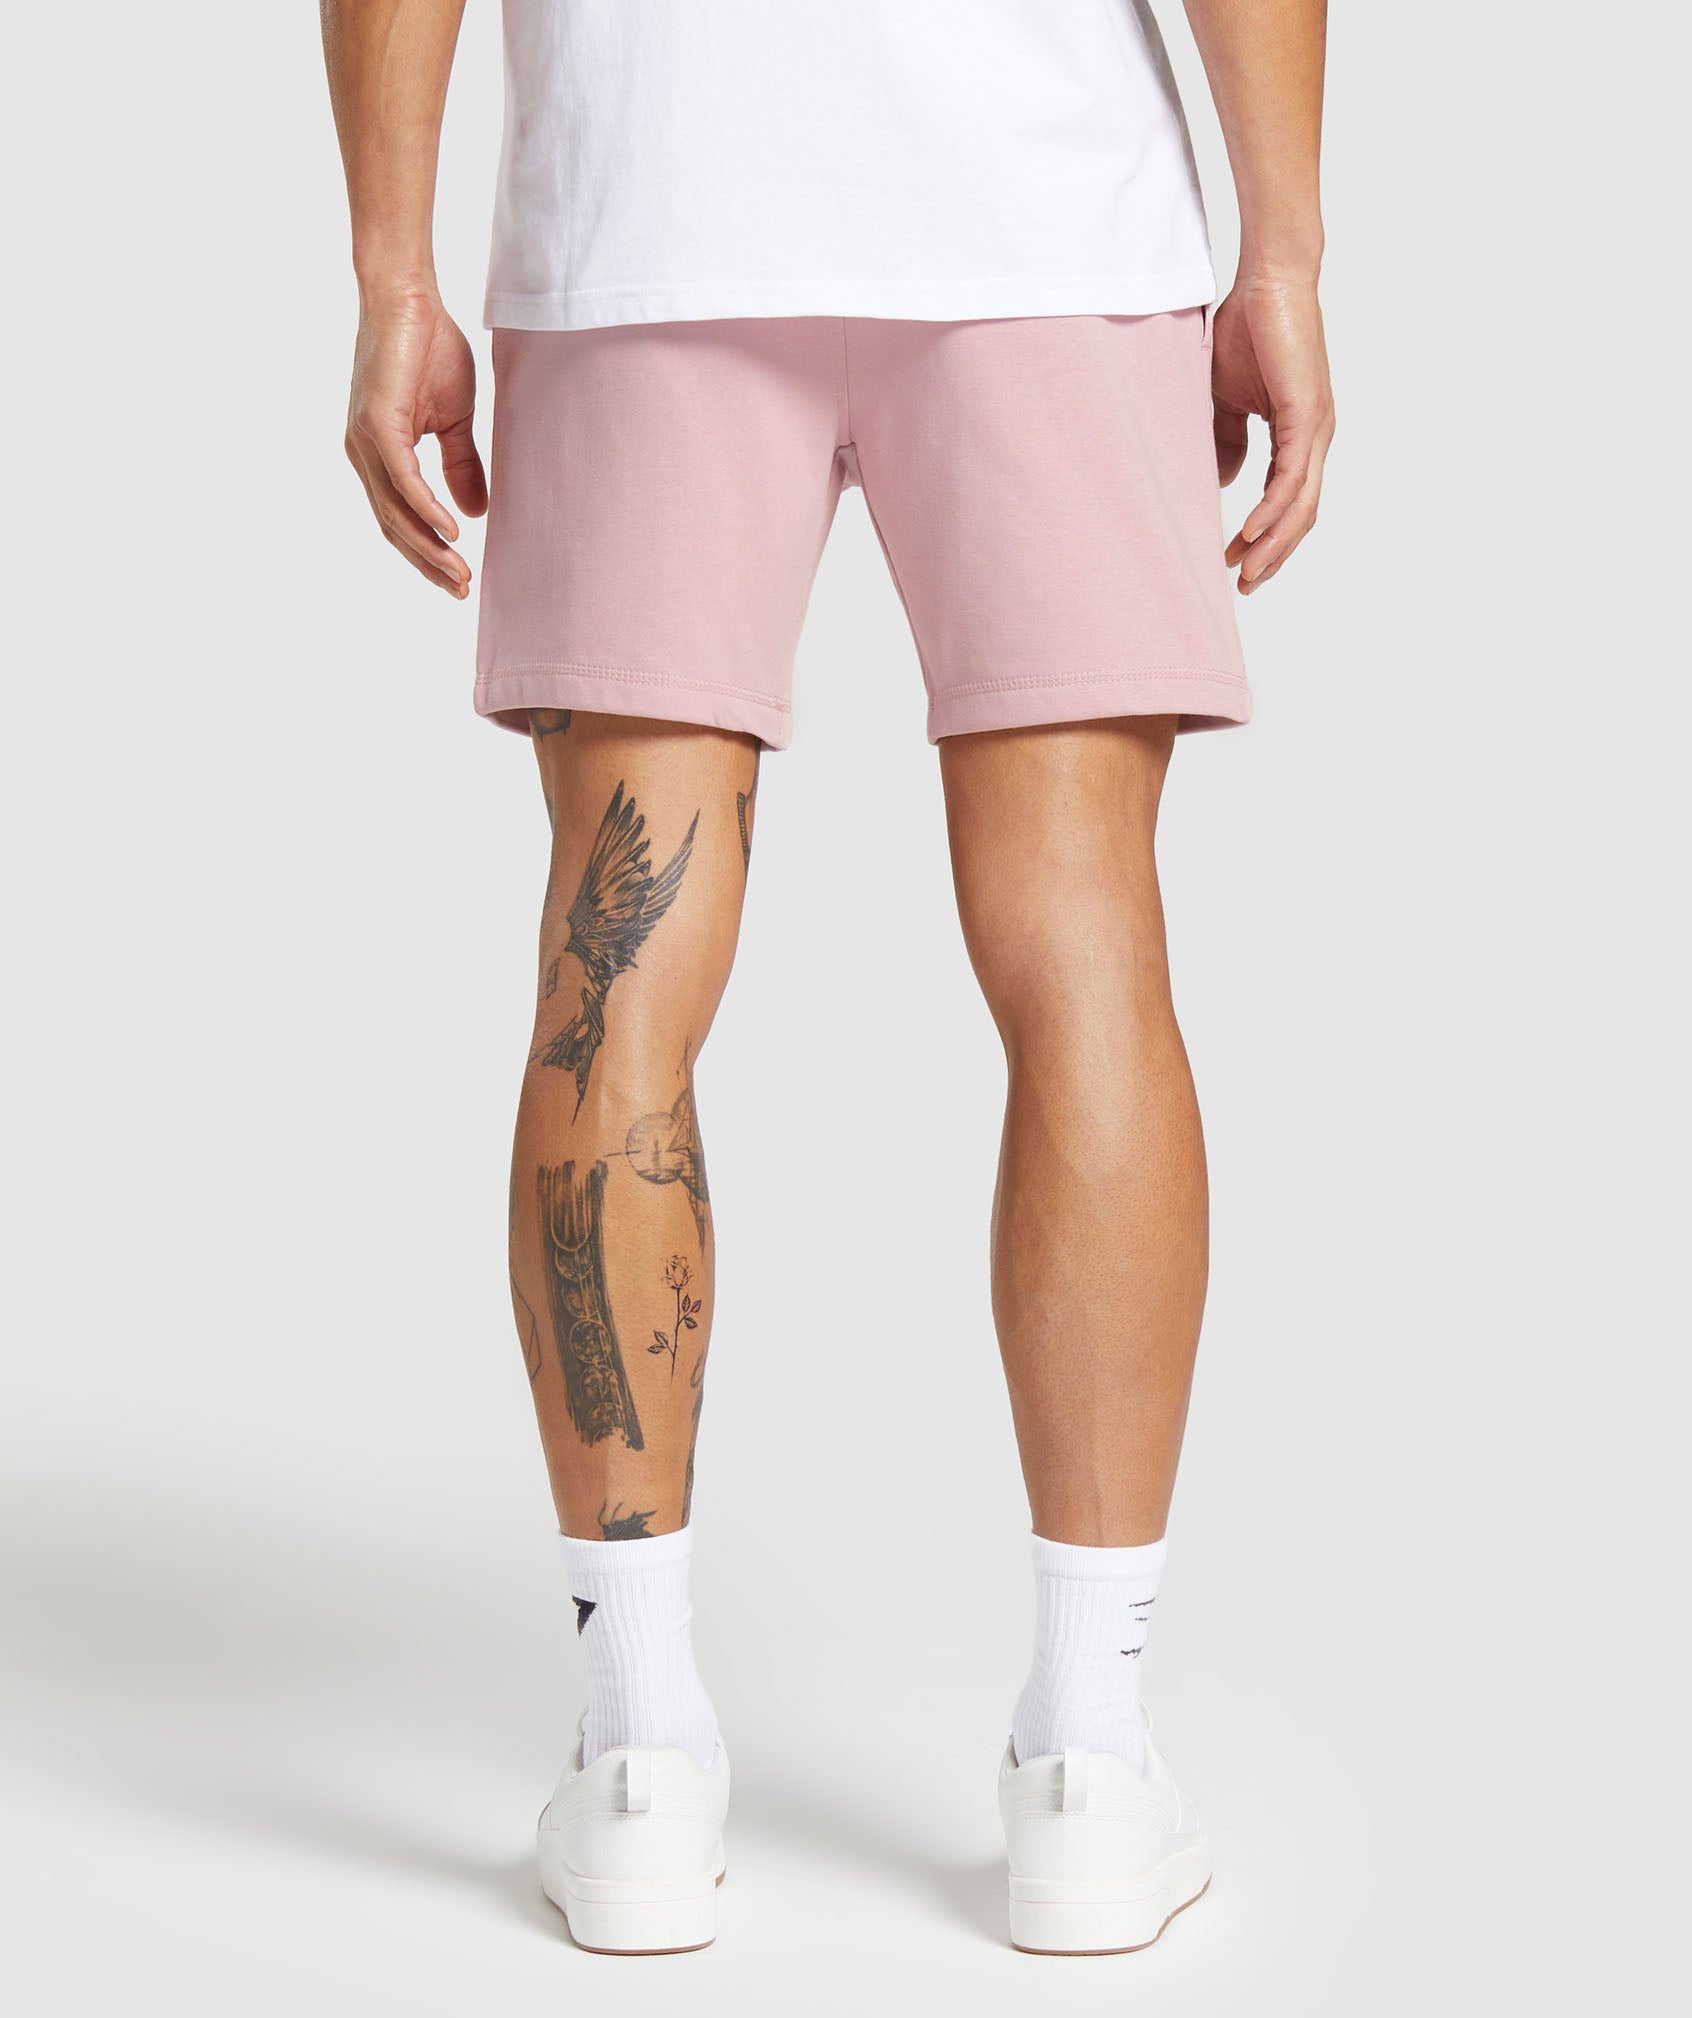 Crest 7" Shorts in Light Pink - view 2